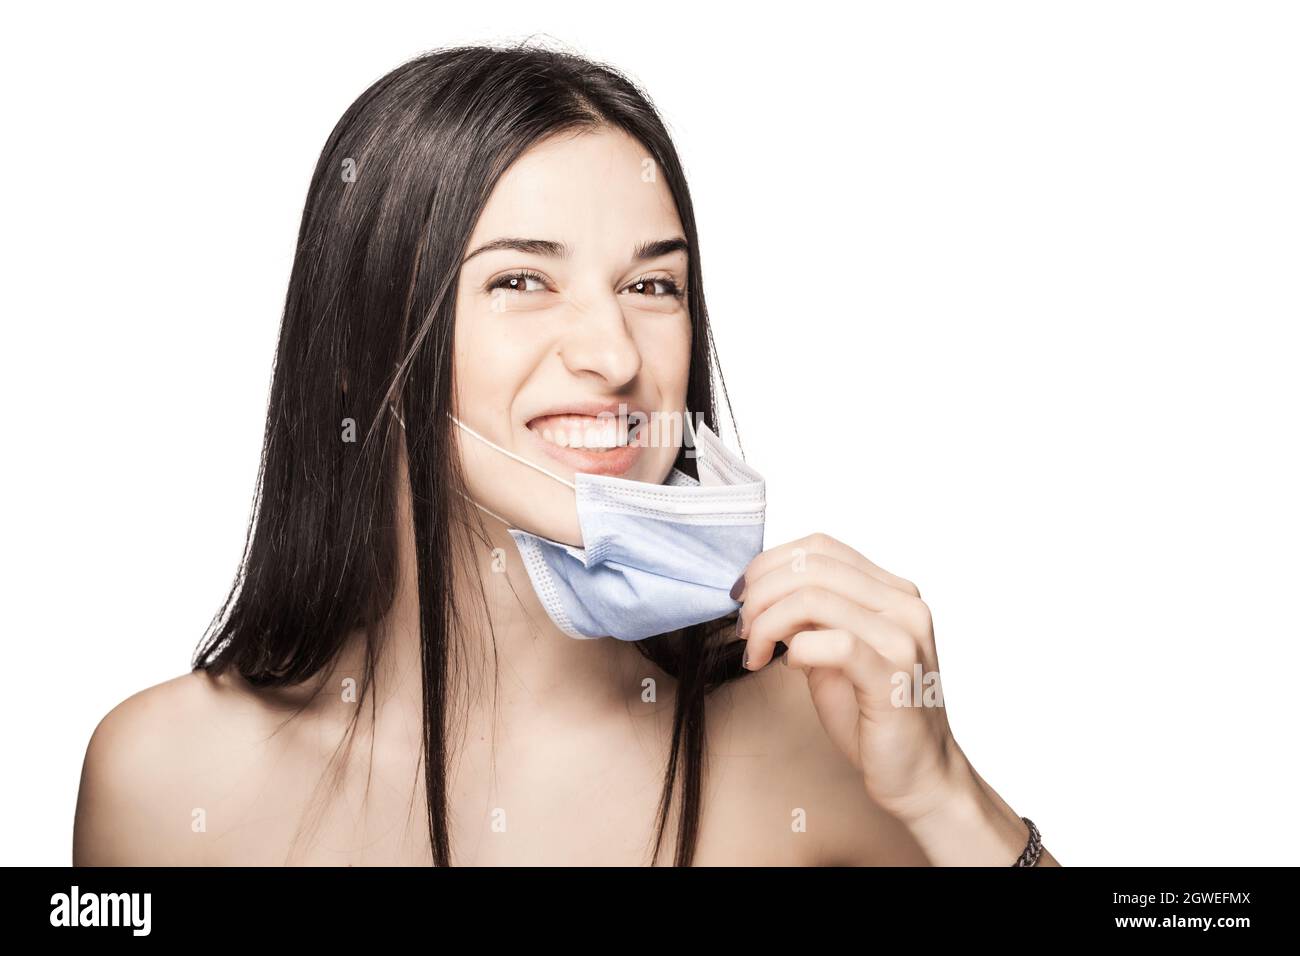 Angry girl pulling away medical face mask. Portrait against white background. Stock Photo